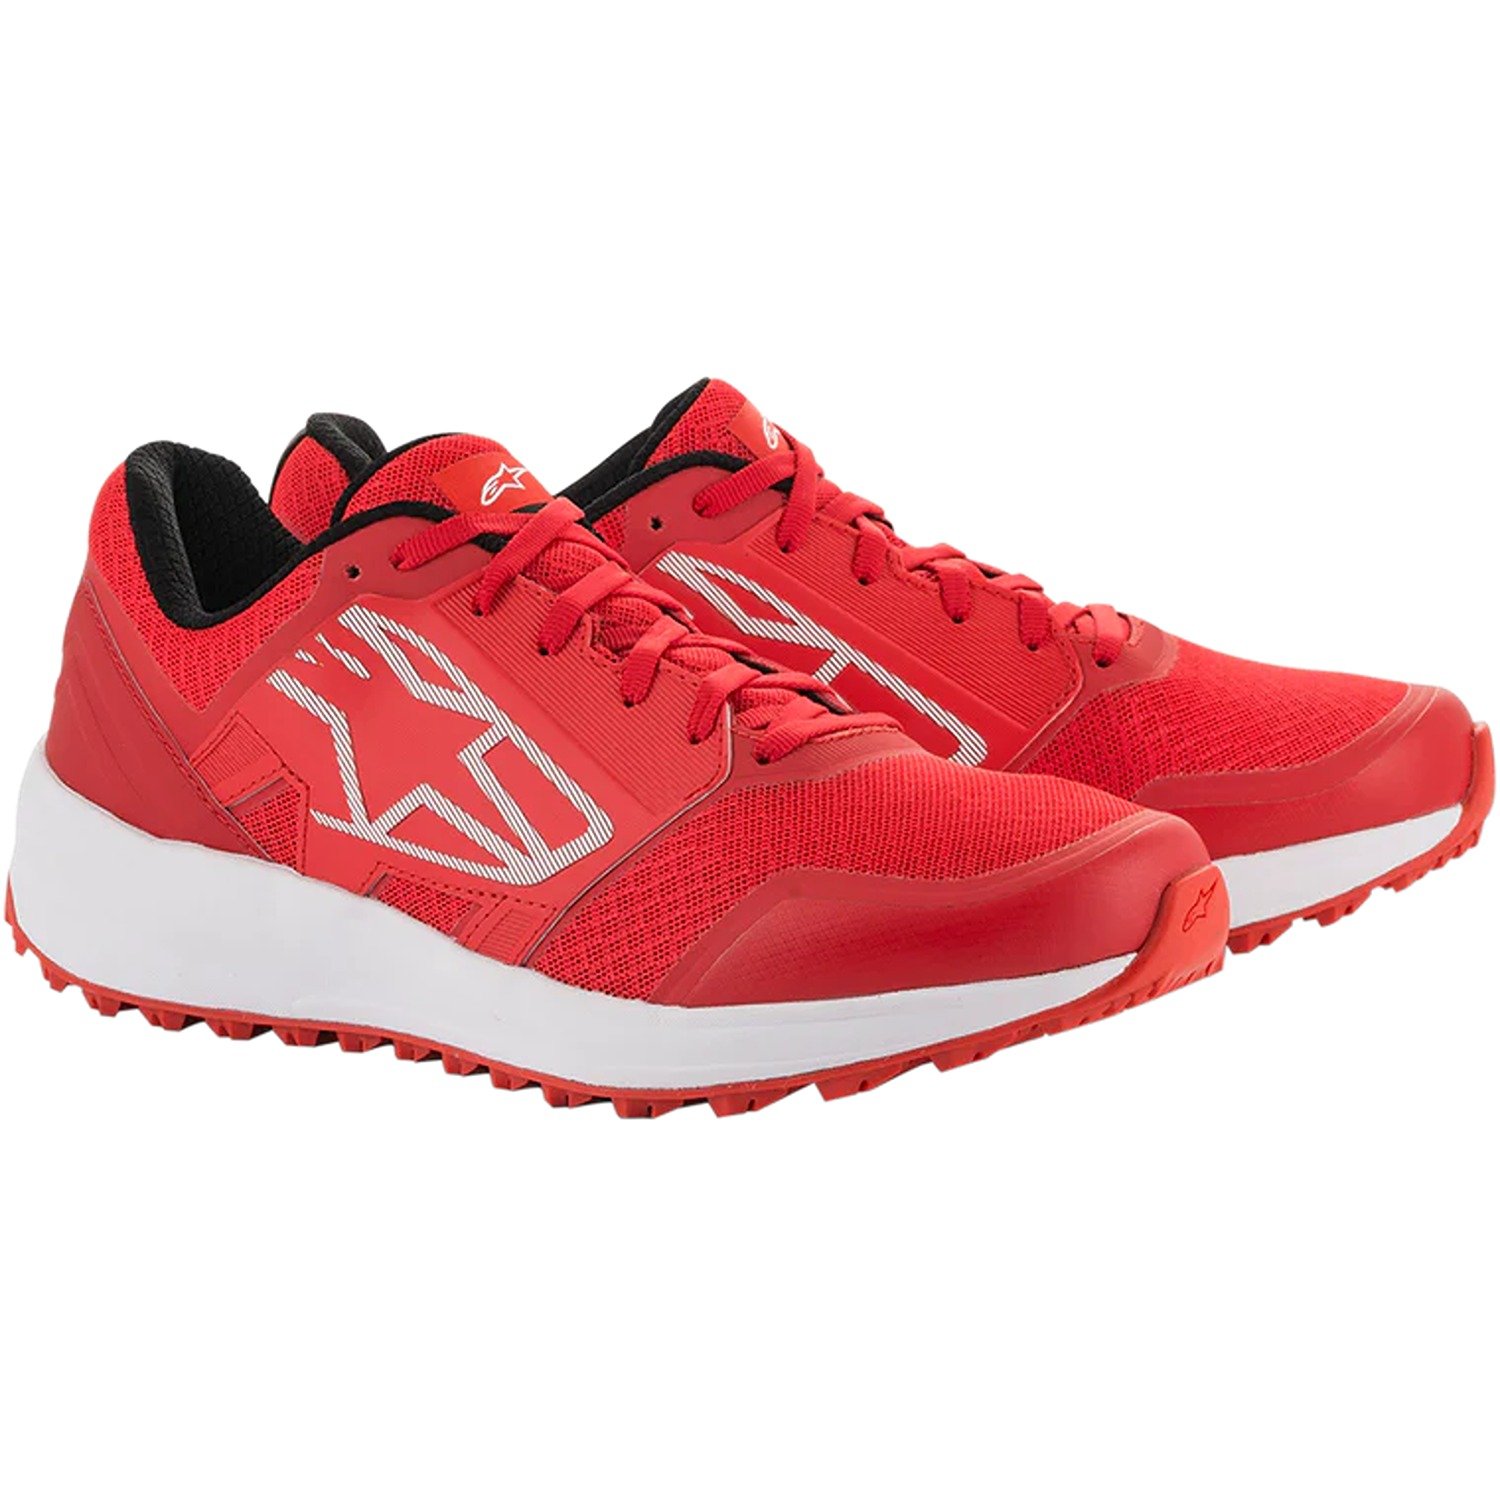 Image of Alpinestars Meta Trail Shoes Red White Taille US 8